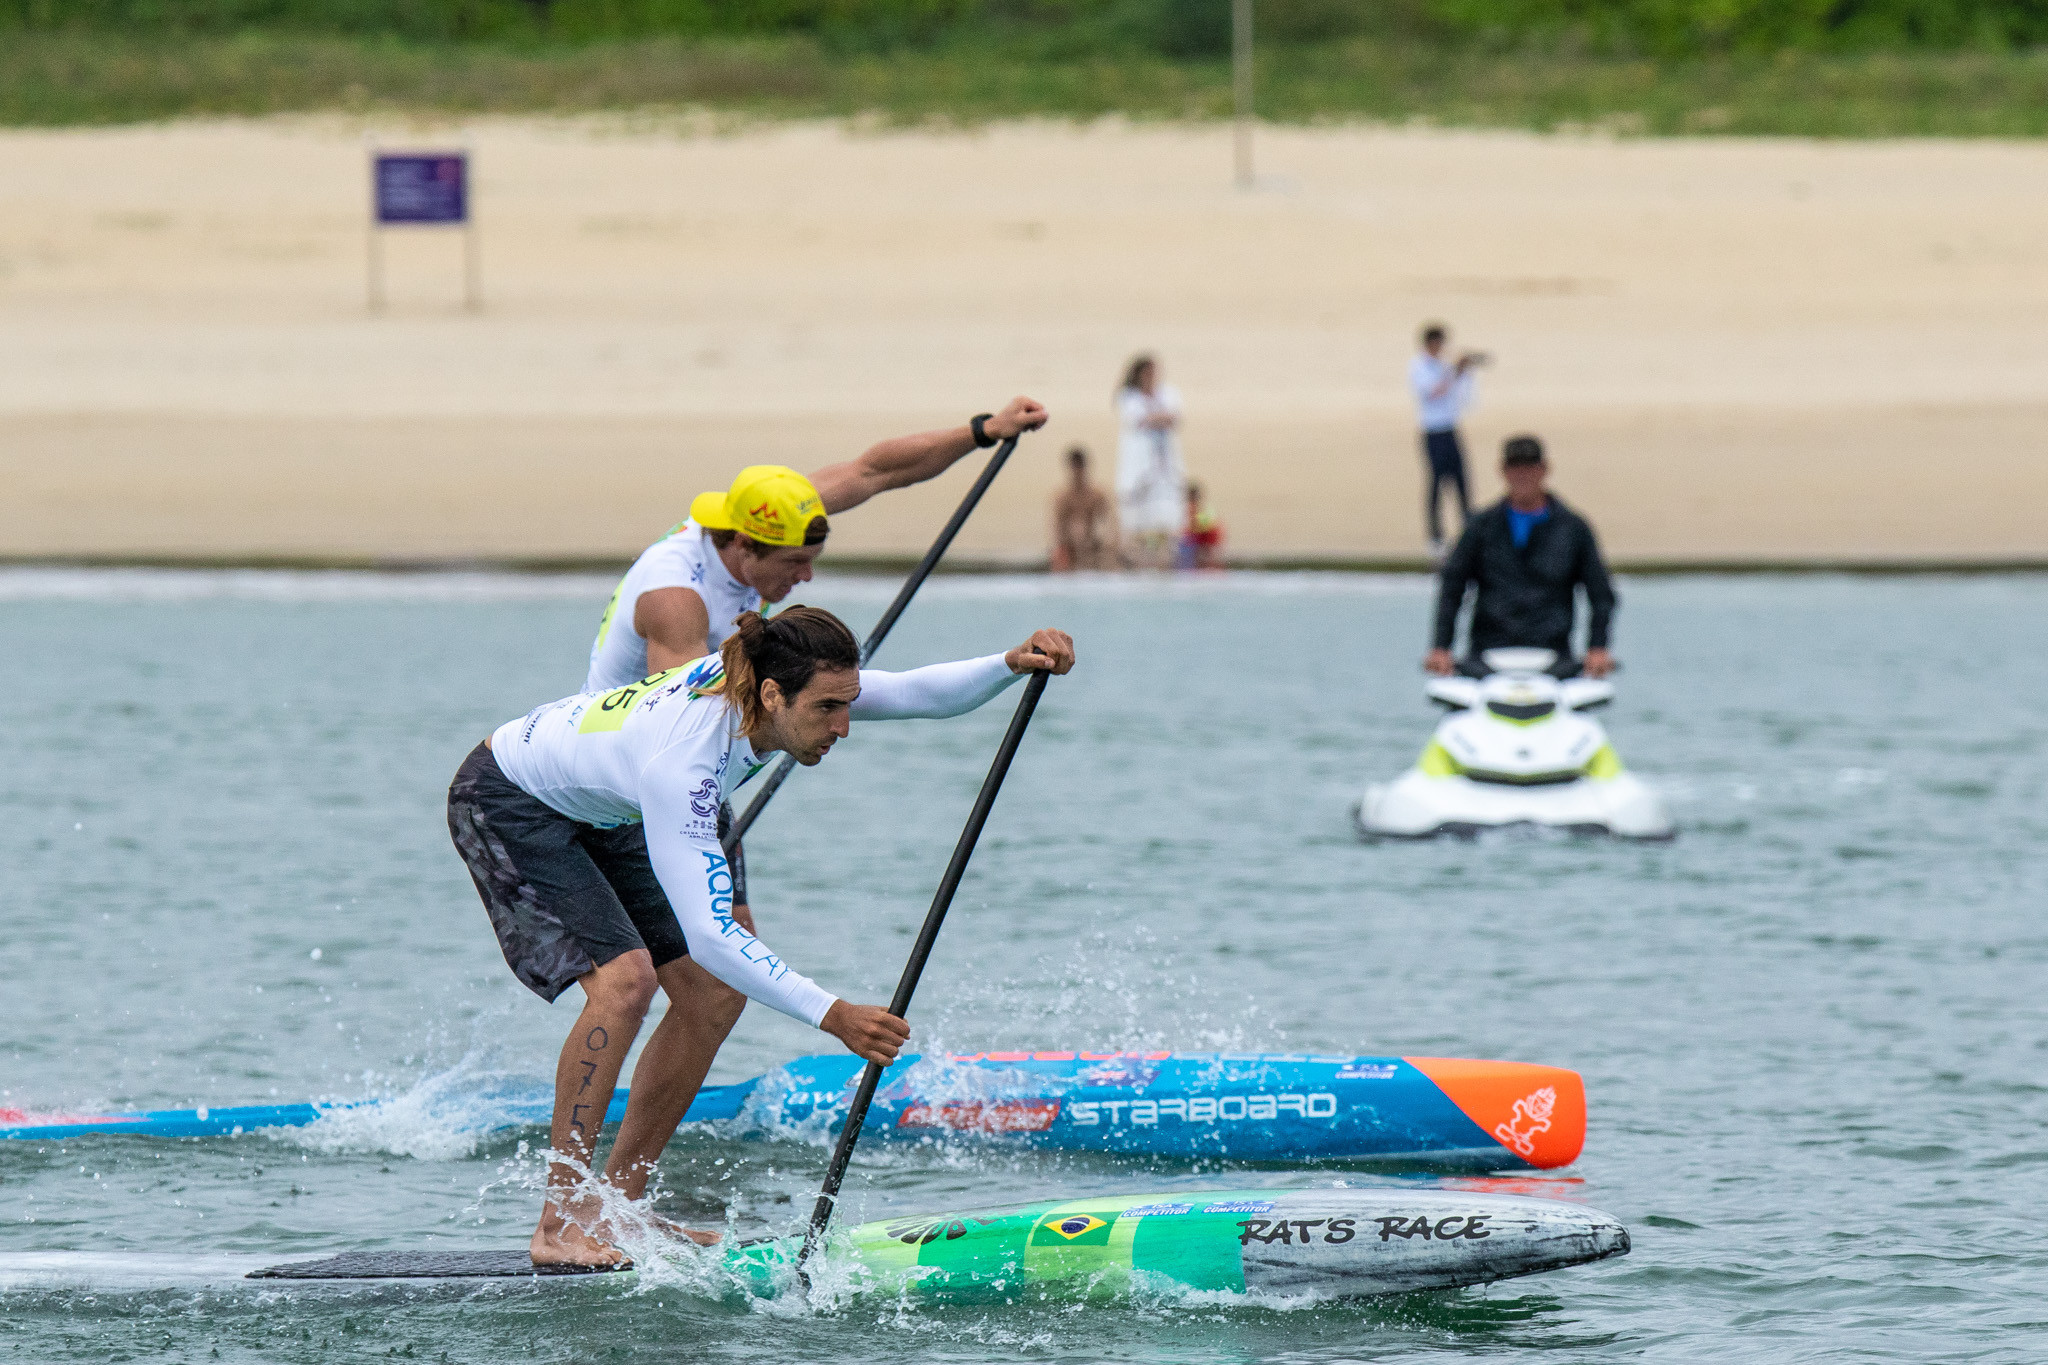 CAS rules both ISA and ICF can hold stand-up paddling events, but ISA to govern at Olympic level